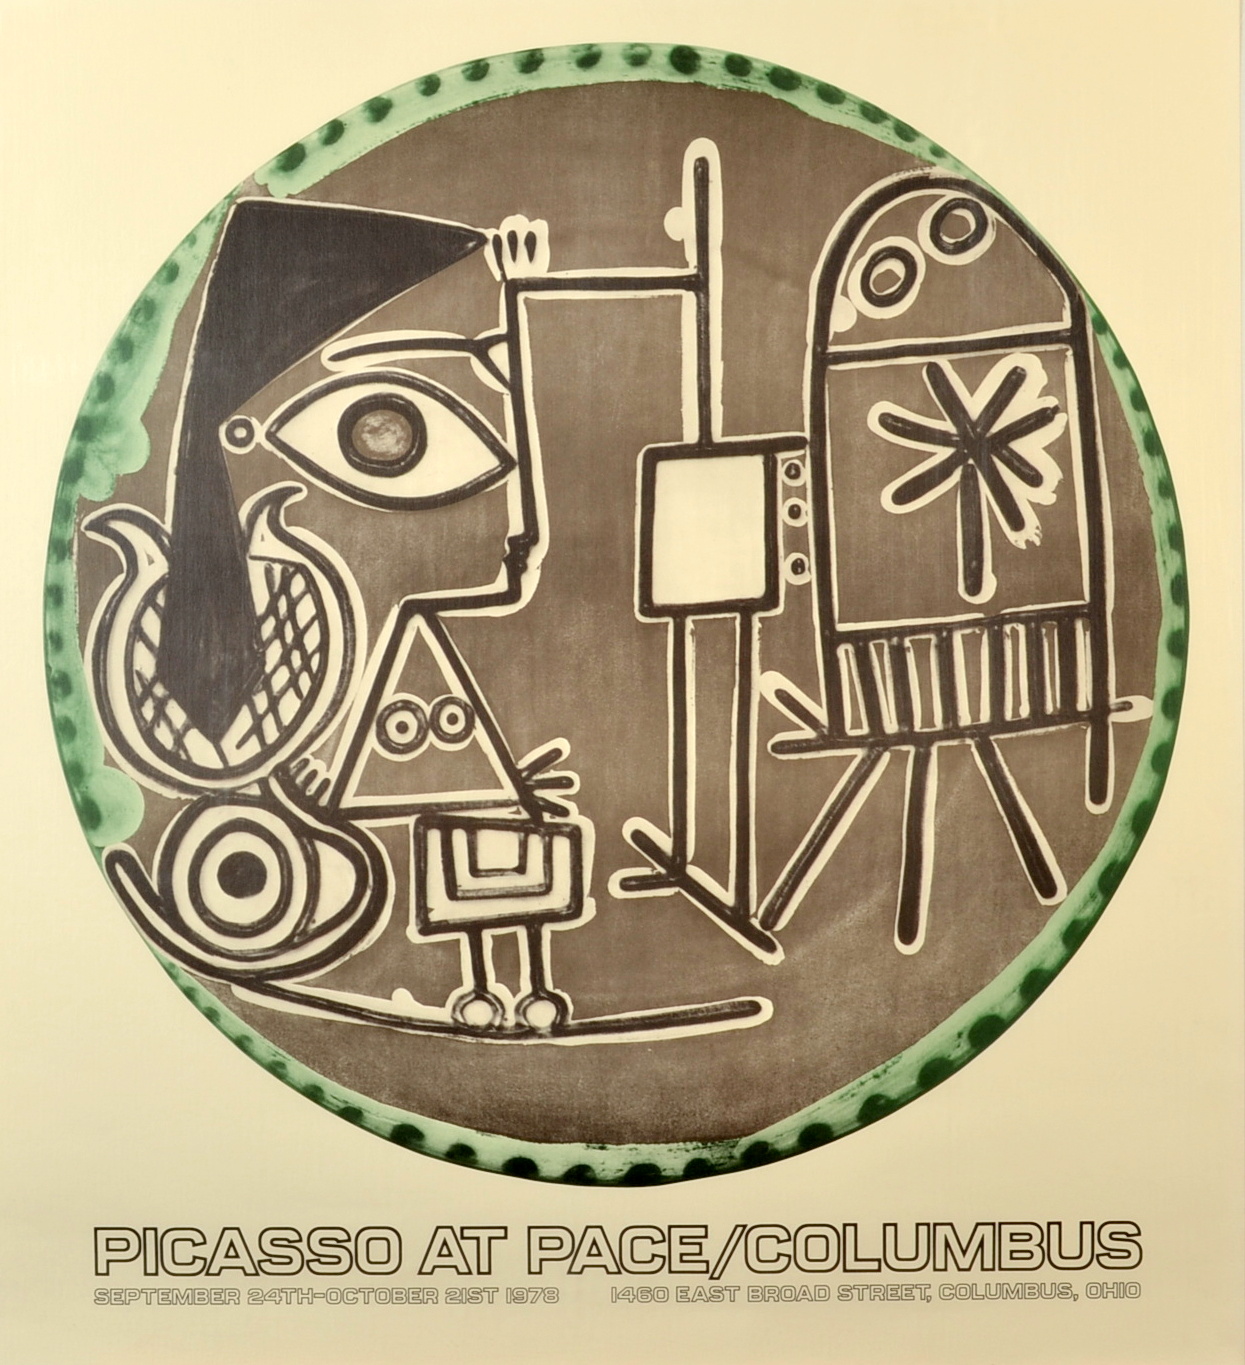 PABLO PICASSO
Picasso at Pace/Columbus
Lithograph 
Dated 1978
66 x 70cm